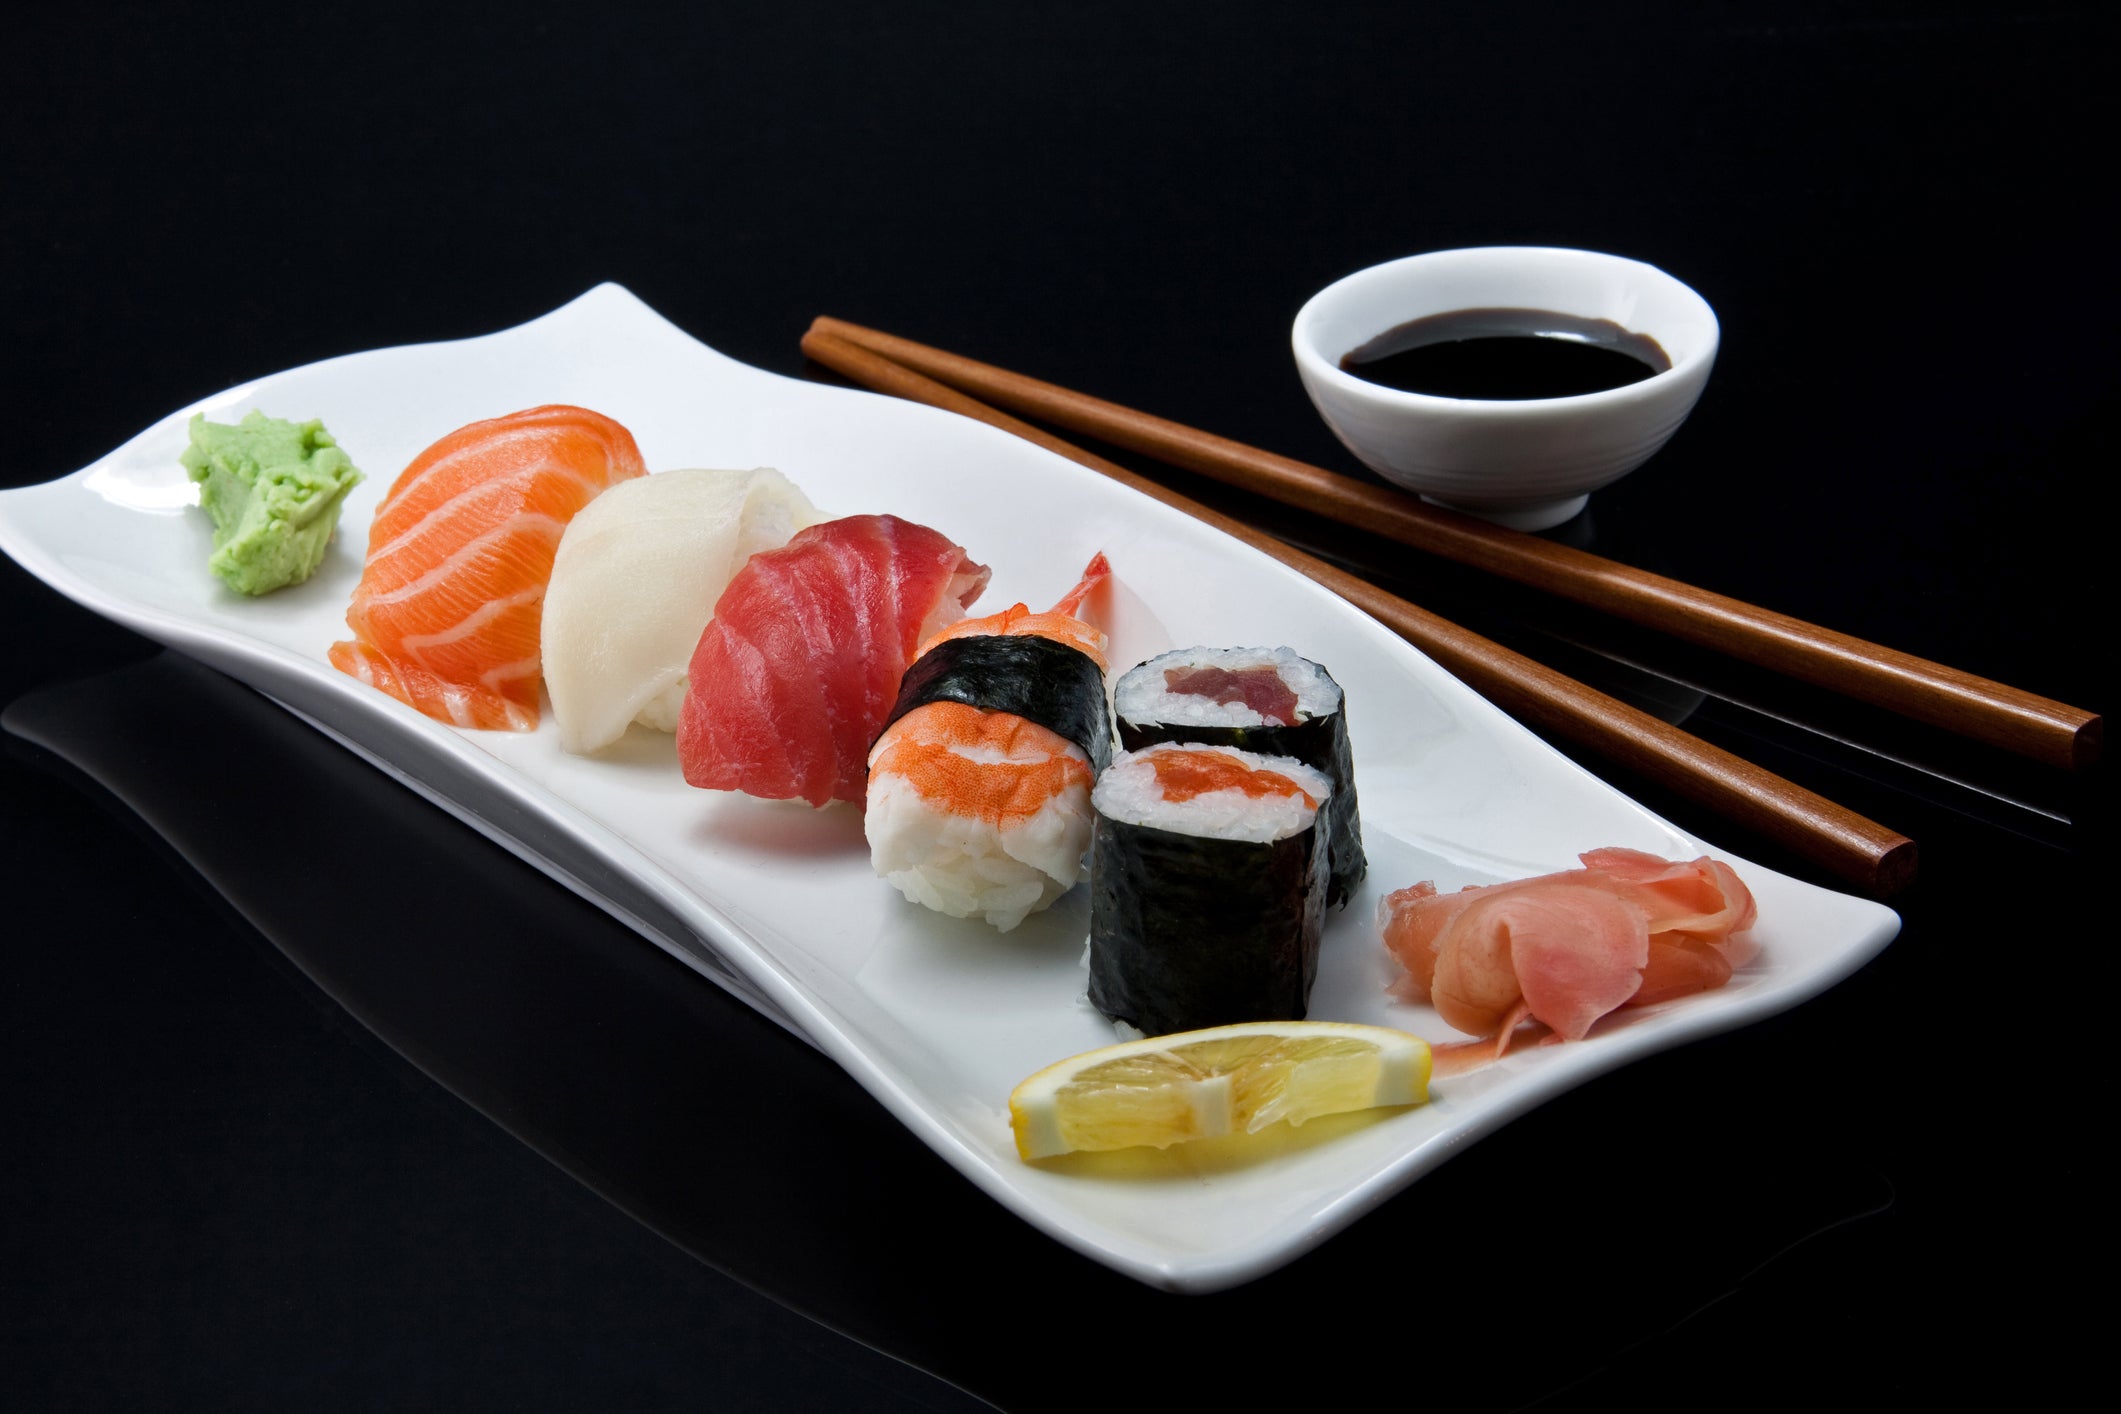 What is the name of the thin slice of raw fish or seafood served over a small mound of rice?